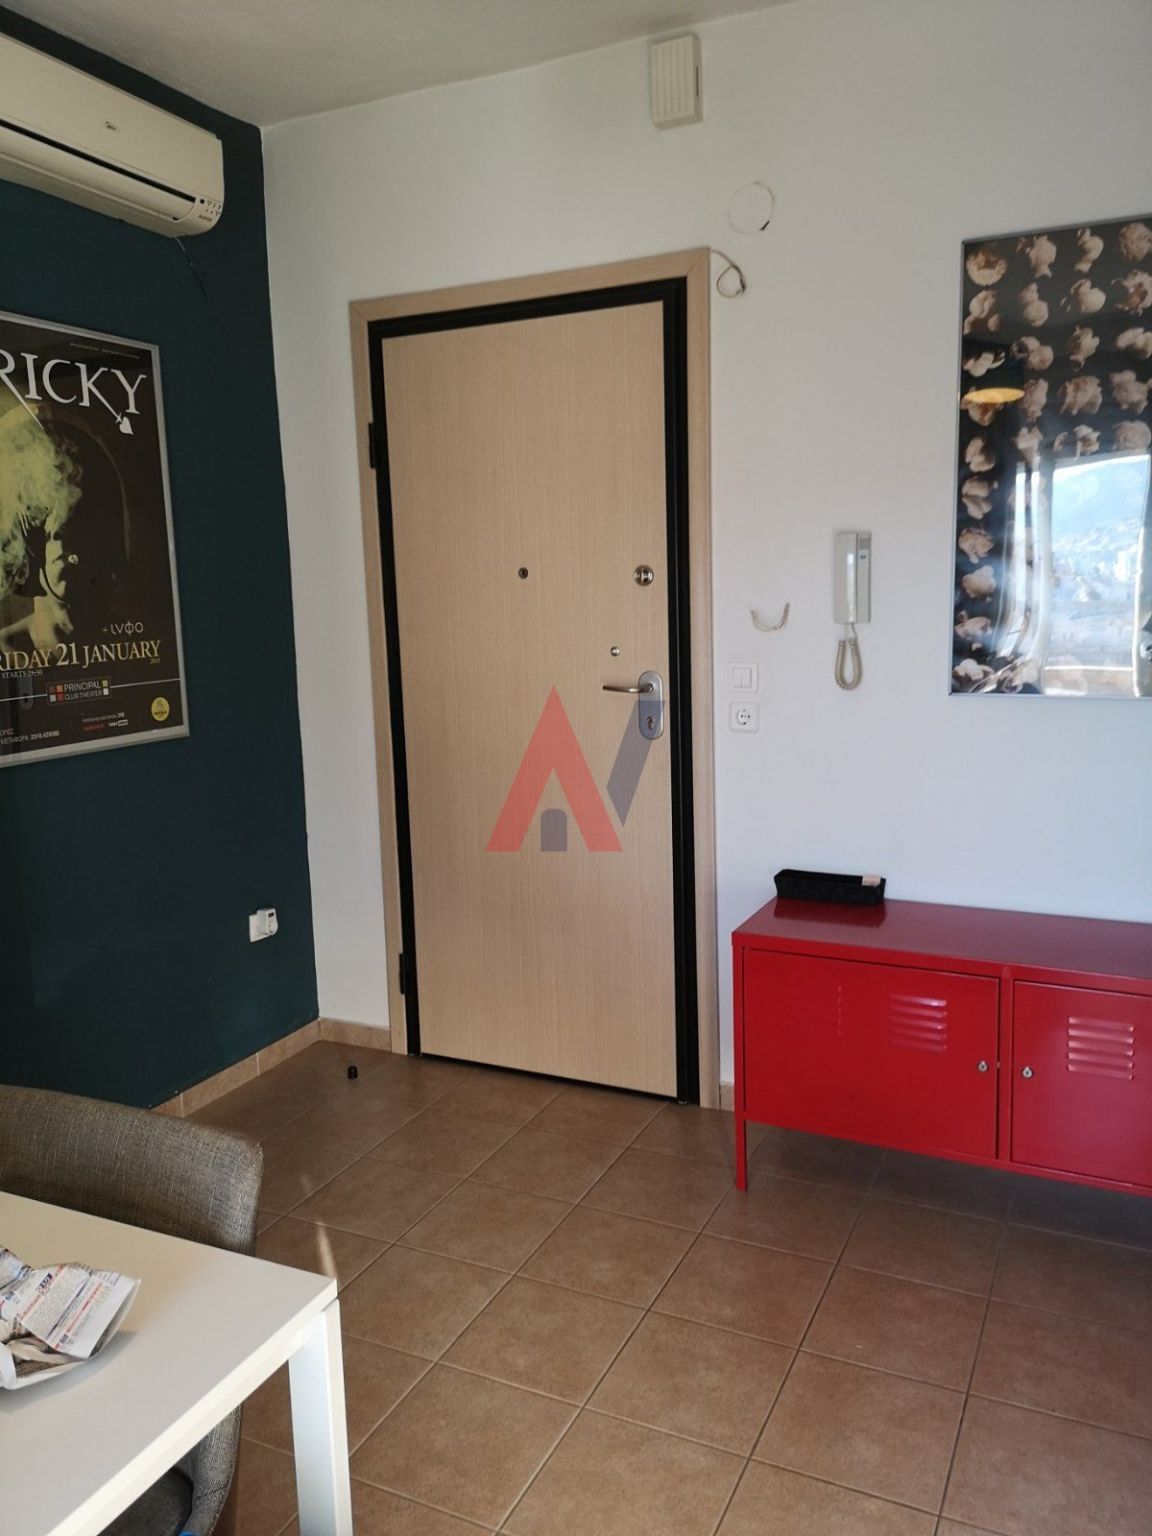 For sale 5th floor Apartment 130sqm Stavroupoli Thessaloniki 